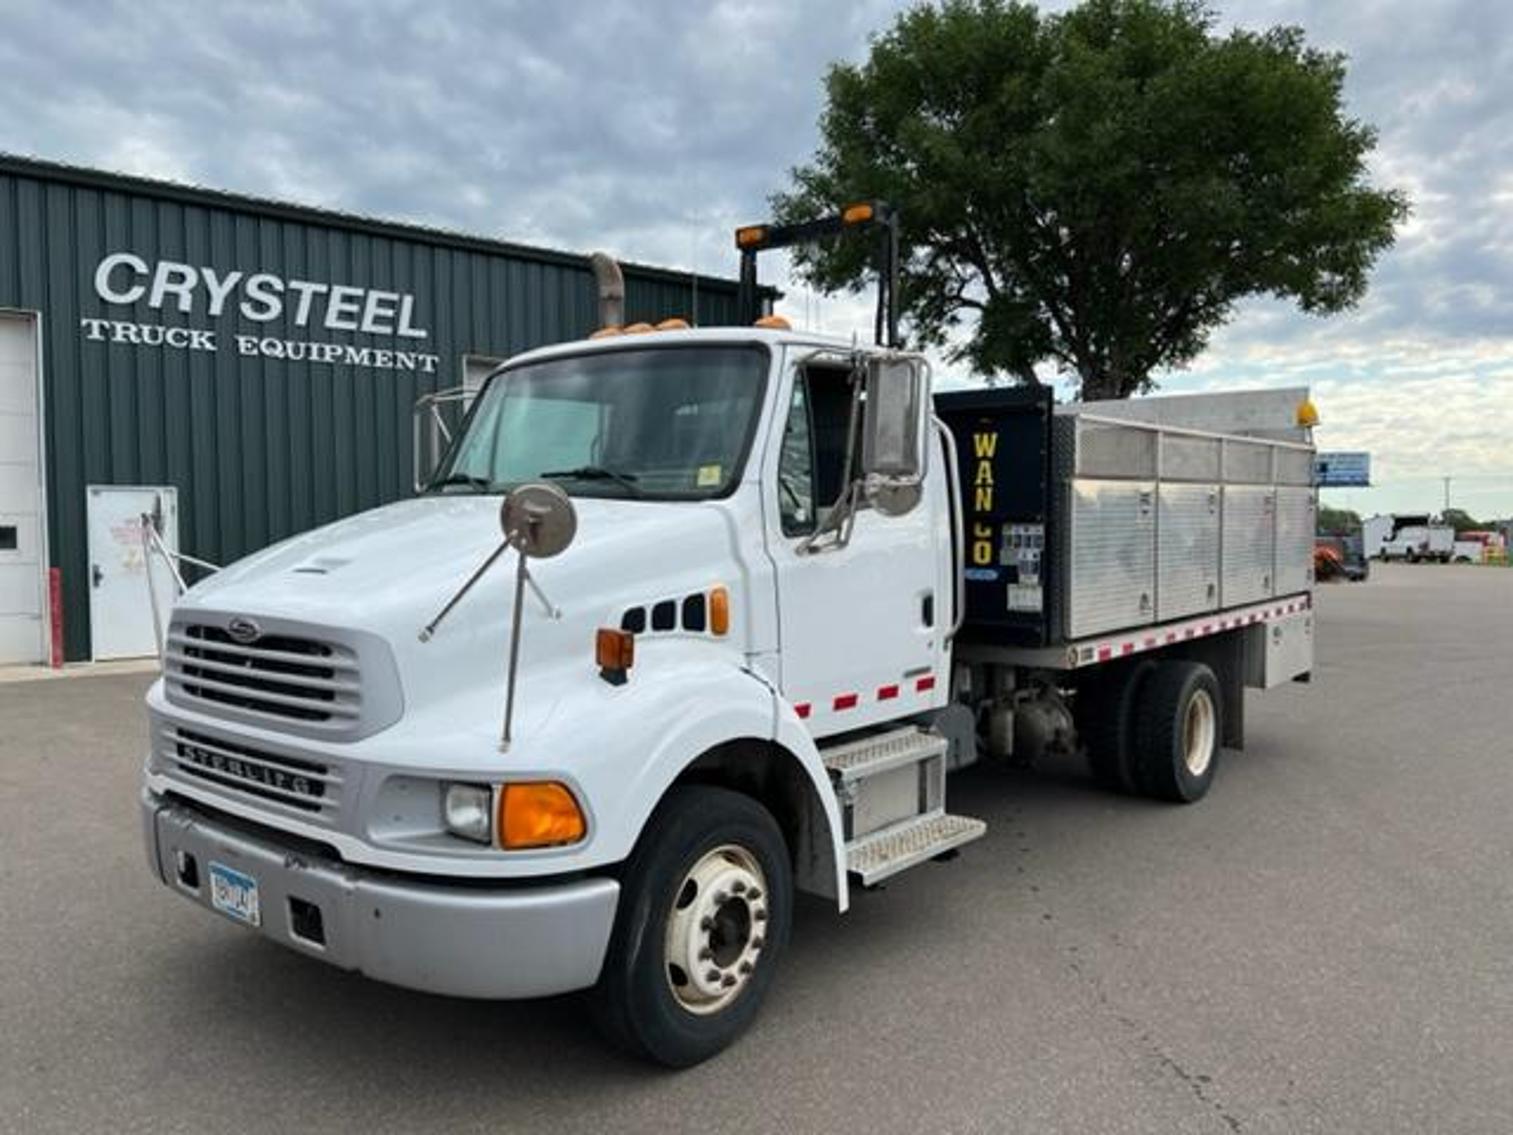 Crysteel Truck Equipment Surplus to Ongoing Operations